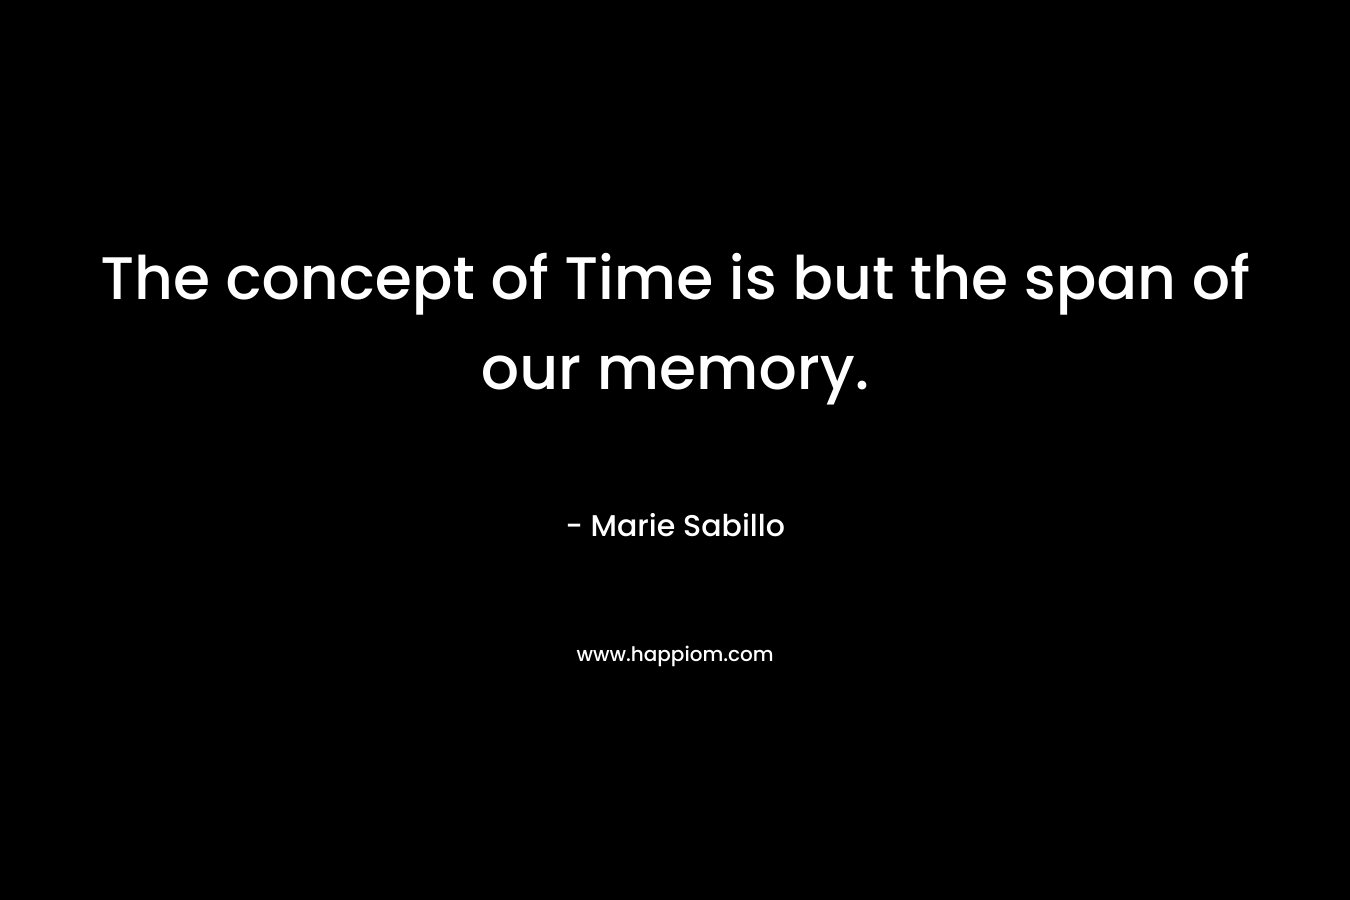 The concept of Time is but the span of our memory. – Marie Sabillo